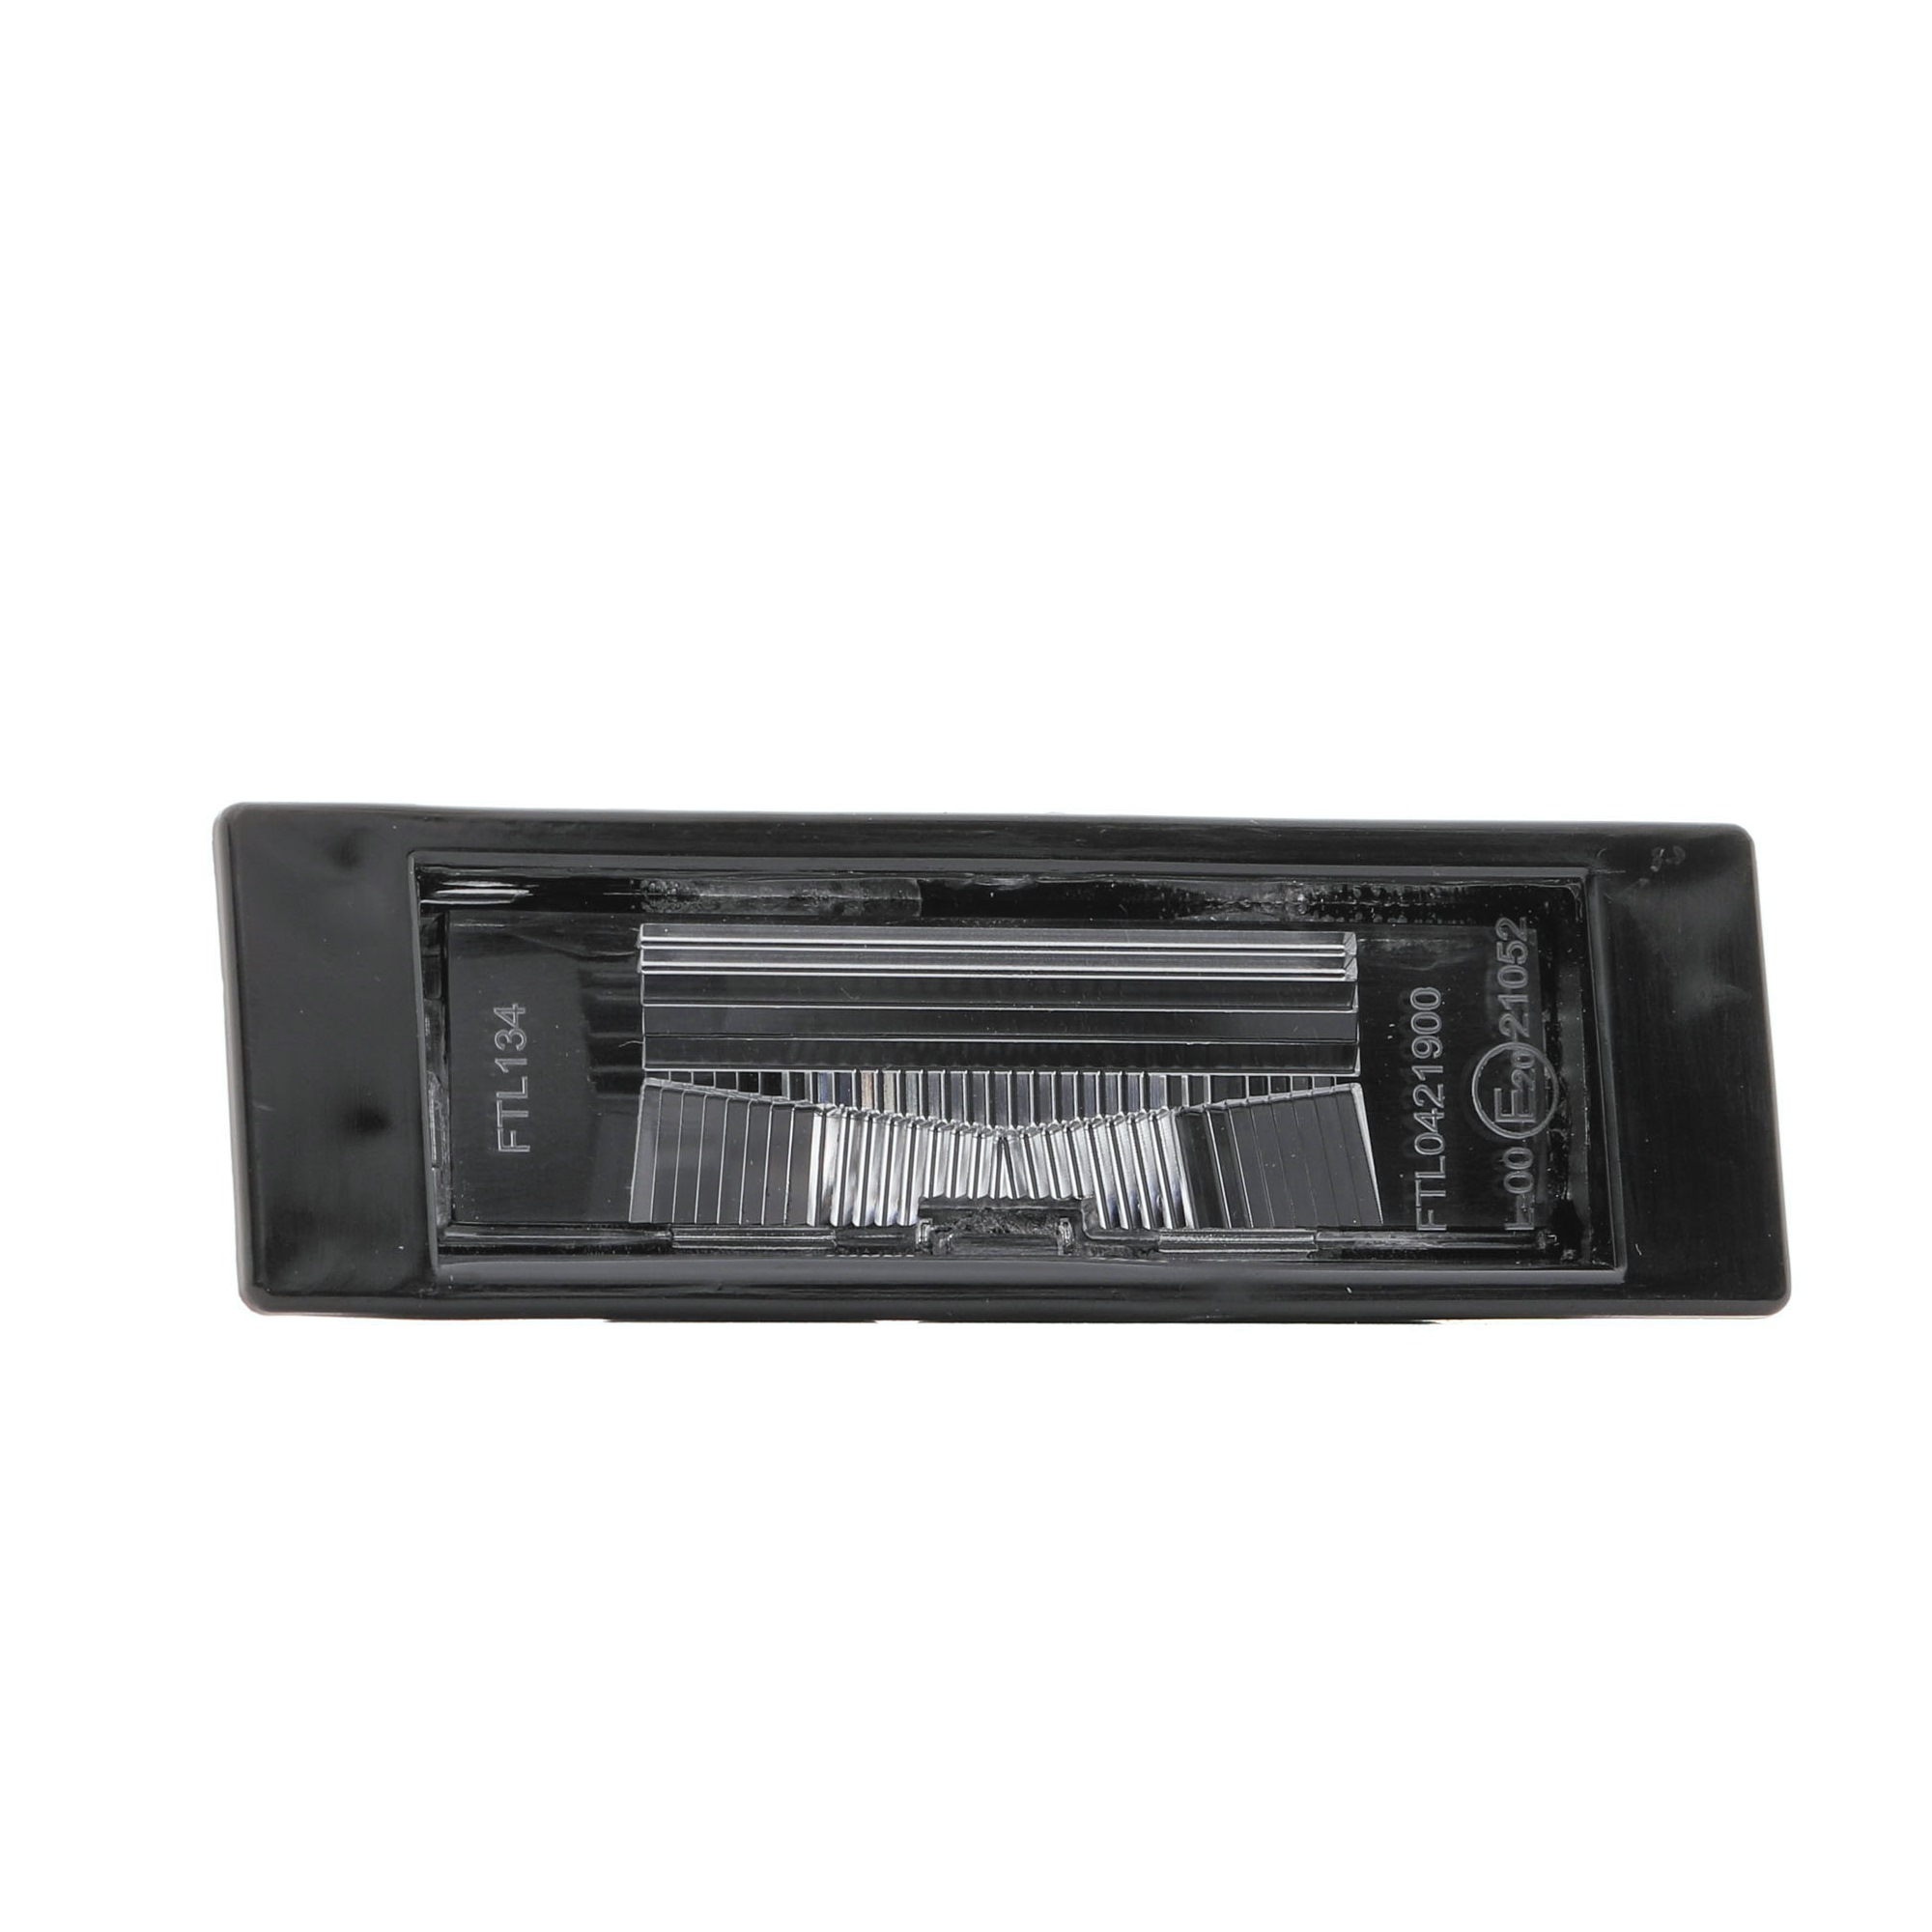 BMW 6 Series Licence Plate Light ABAKUS 004-21-900 cheap